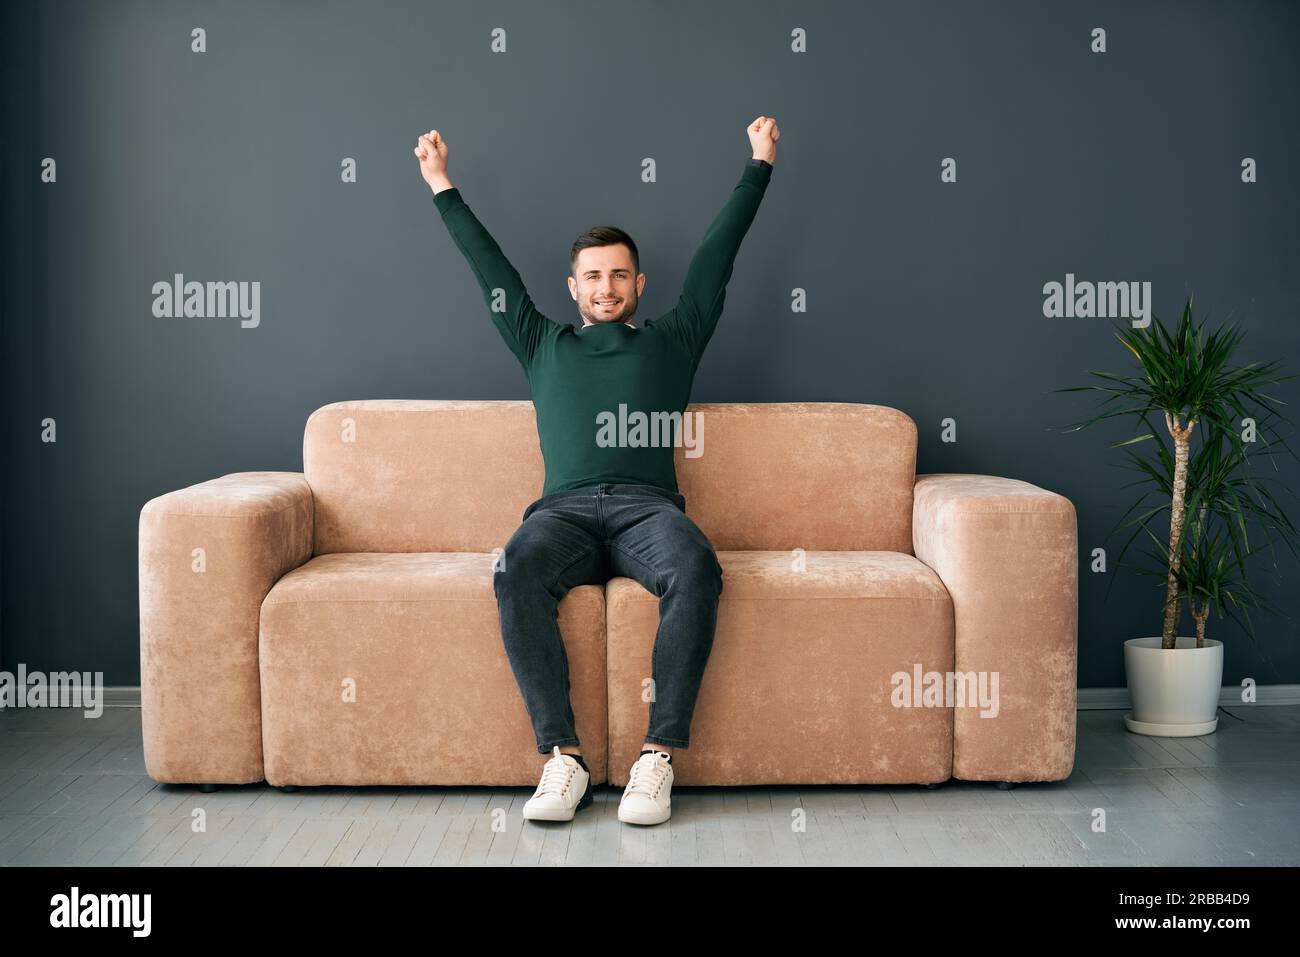 Joyful young man with arms raised celebrating success sitting on sofa in modern apartment. Winner concept Stock Photo